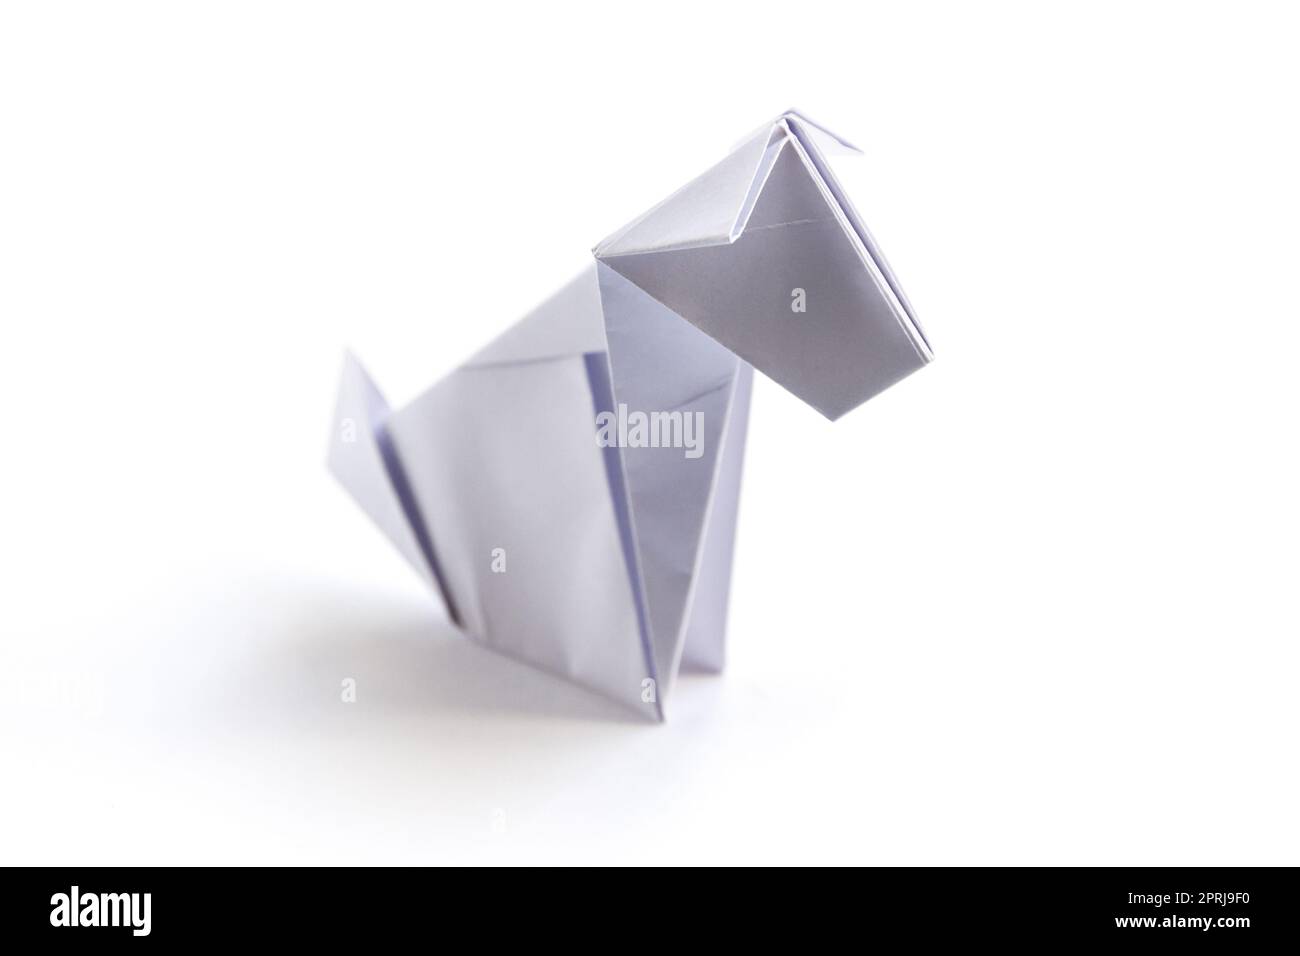 Paper dog origami isolated on a white background Stock Photo